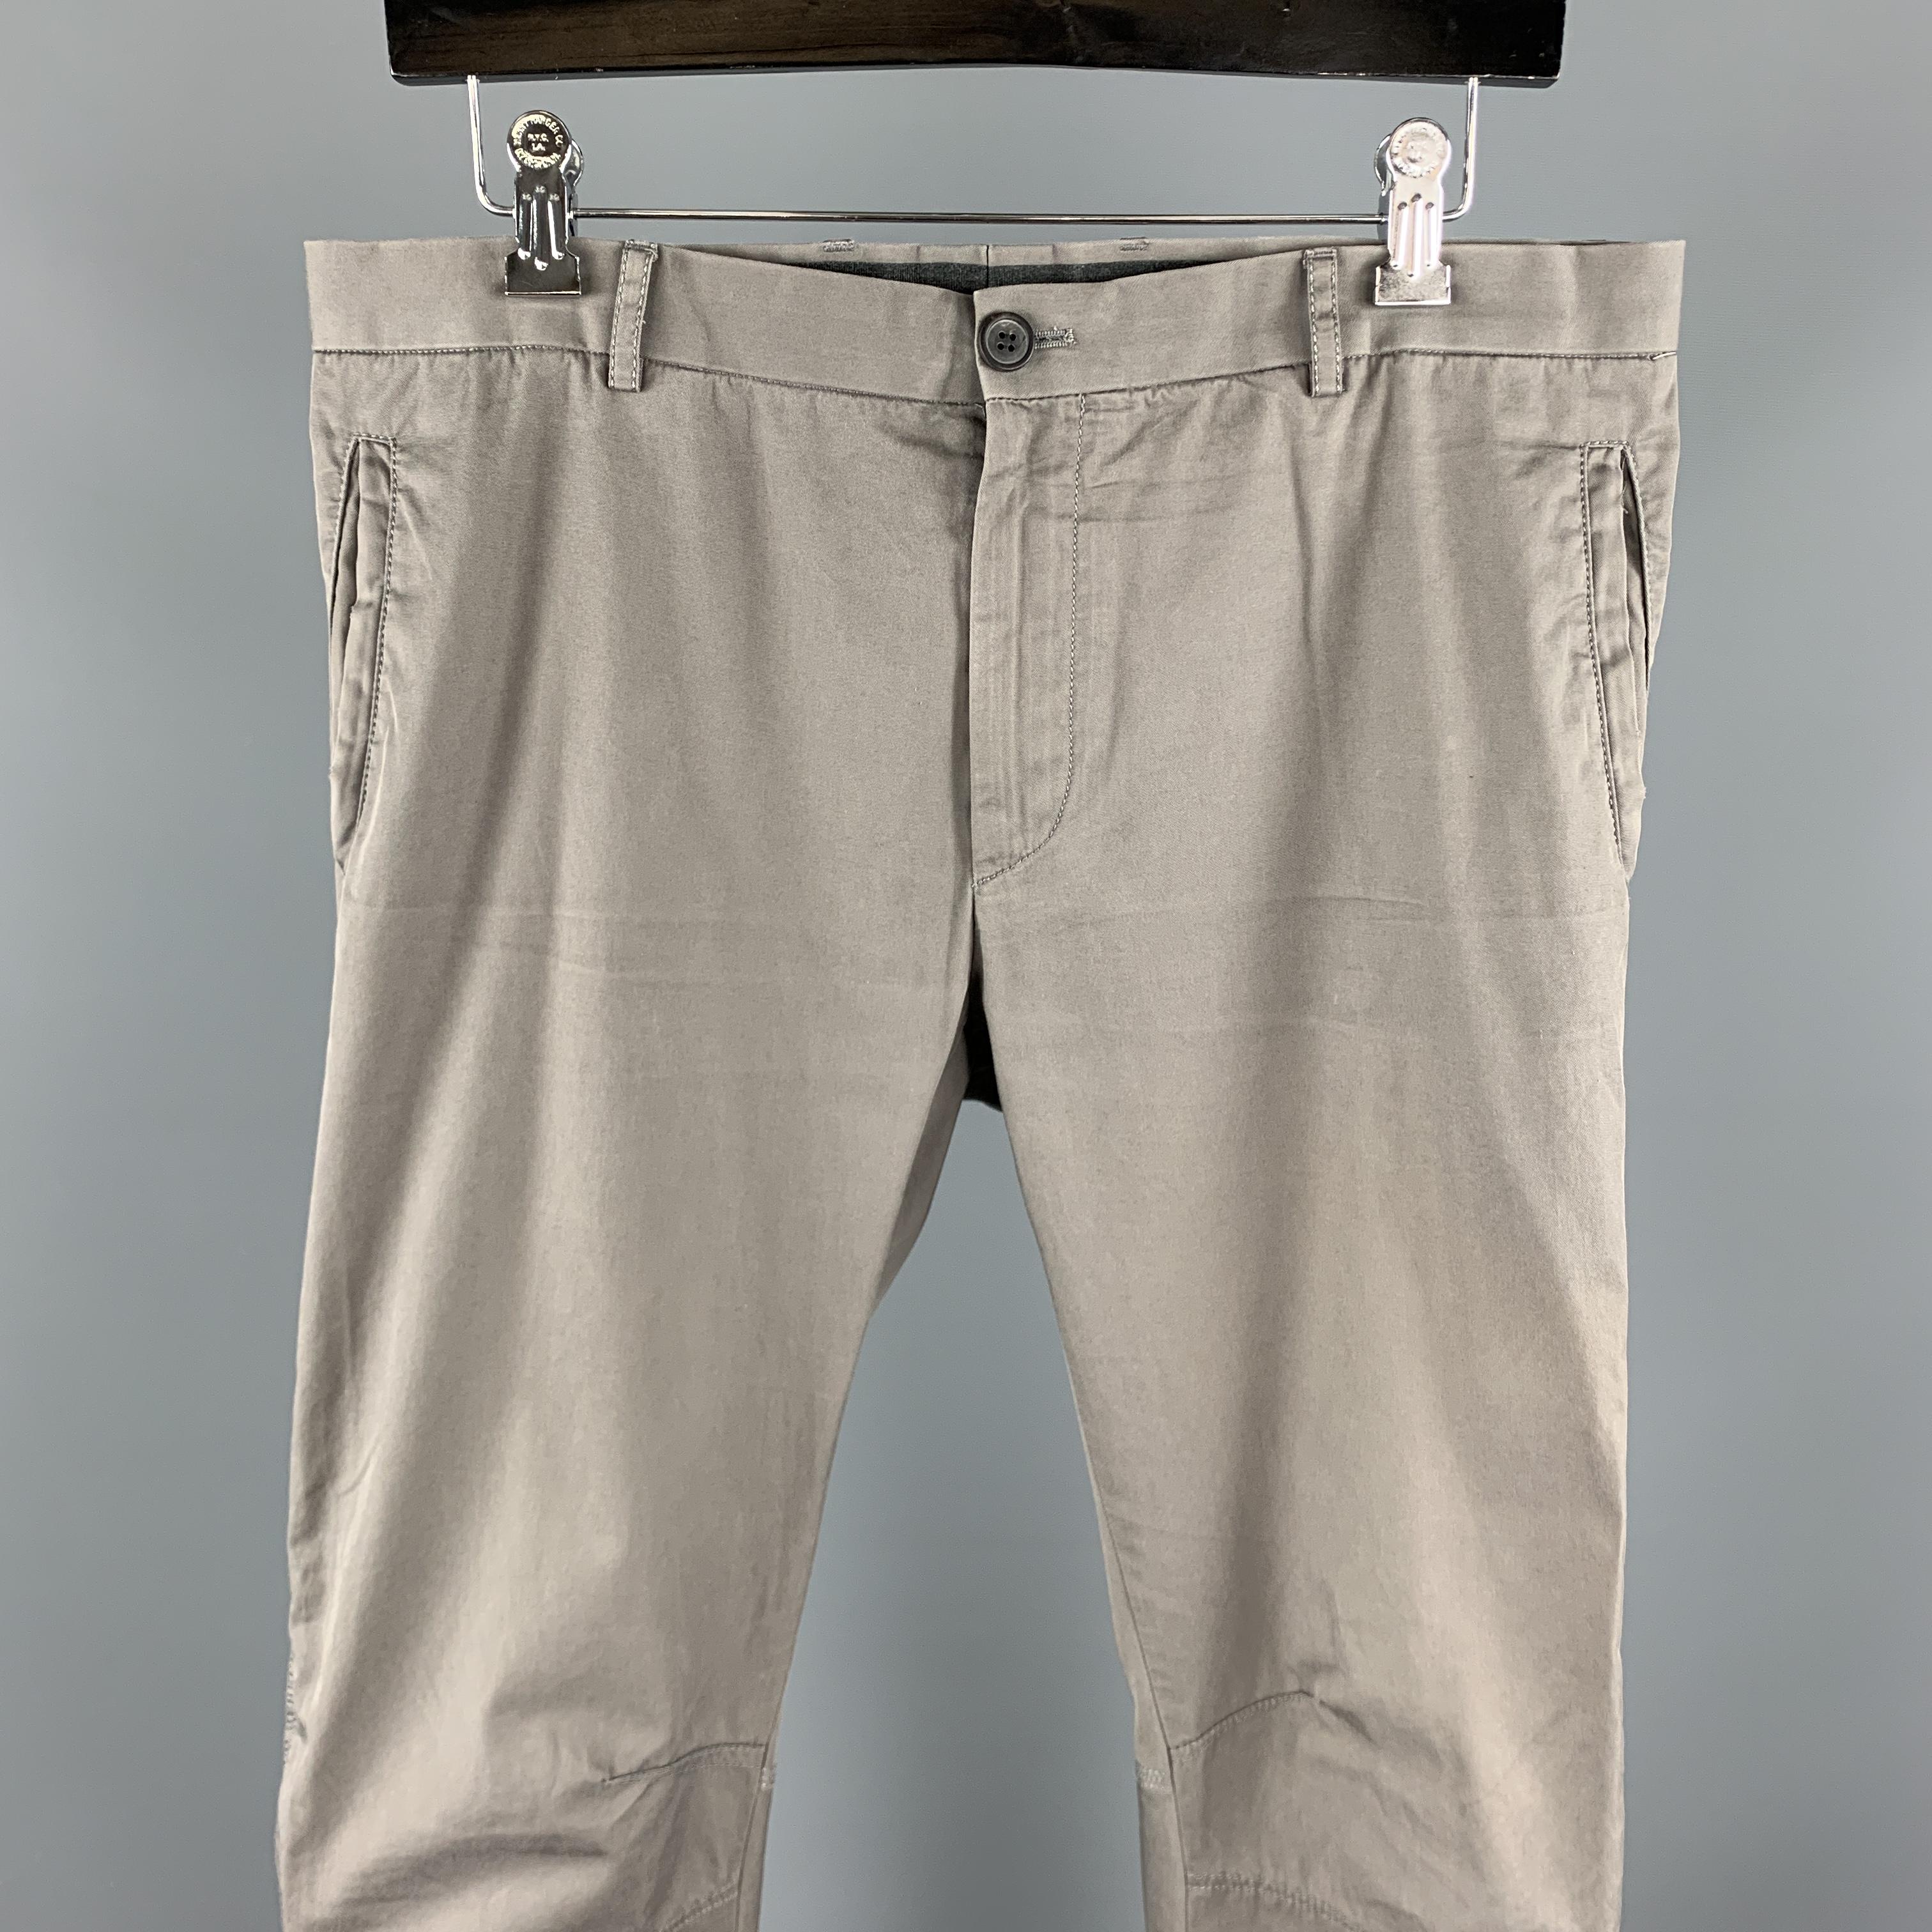 LANVIN casual pants comes in a gray cotton blend featuring a skinny fit, knee stitching, leg zipper details, and a zip fly closure. Made in Romania.

Excellent Pre-Owned Condition.
Marked: 48

Measurements:

Waist: 34 in.
Rise: 8.5 in.
Inseam: 29 in.